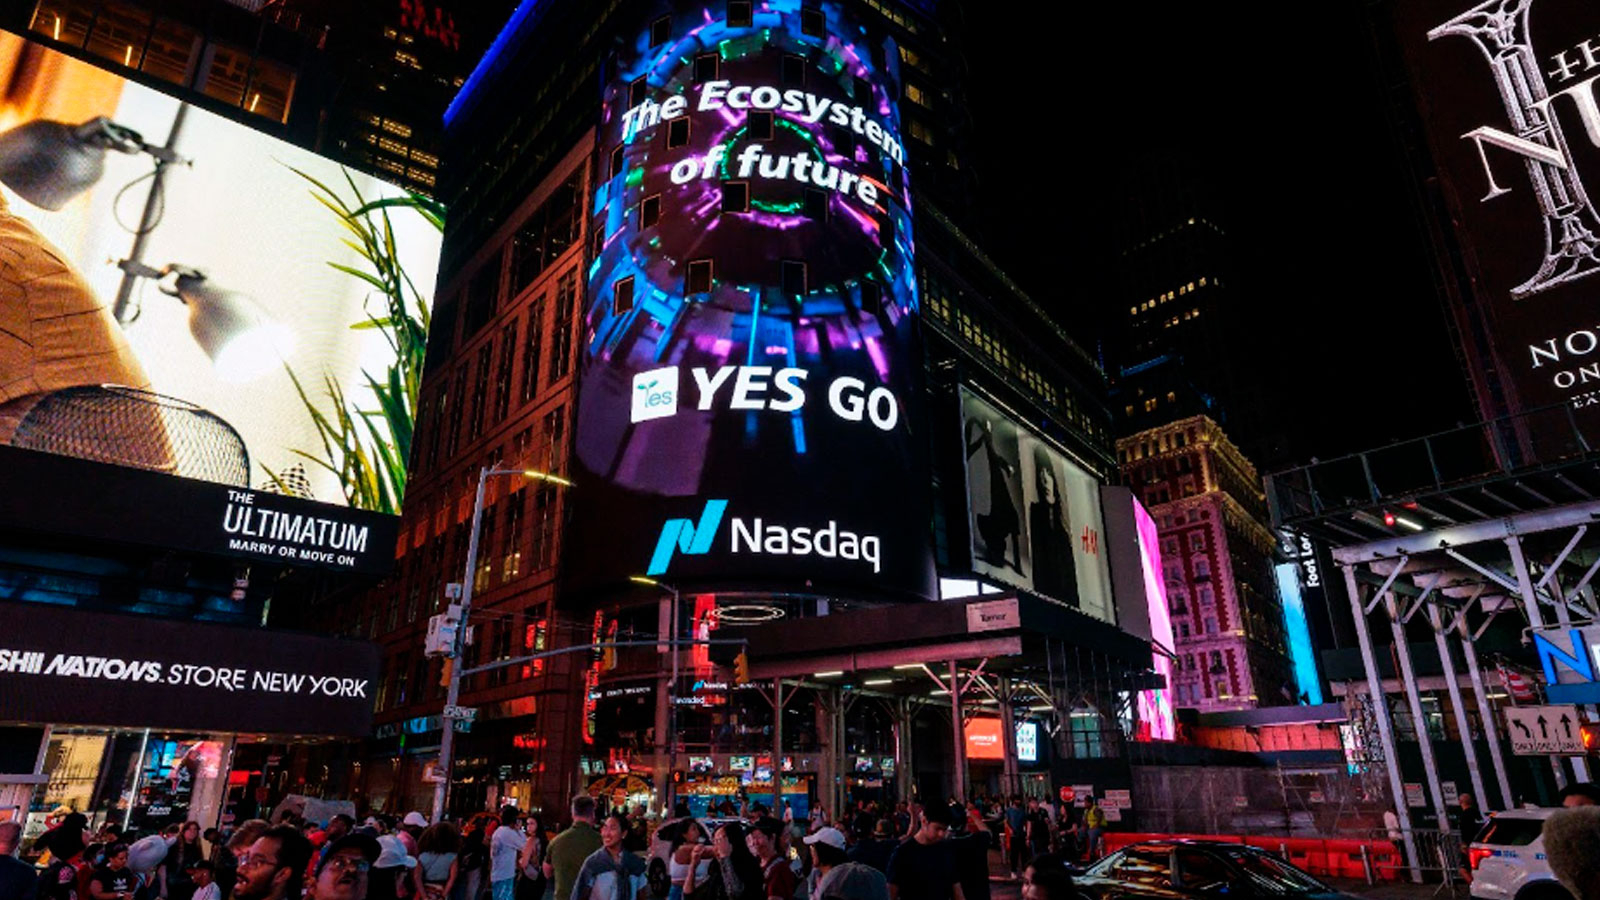 Discover the Yesgo (YESGO) Listing on XT.COM and Launch on Nasdaq billboard in Times Square